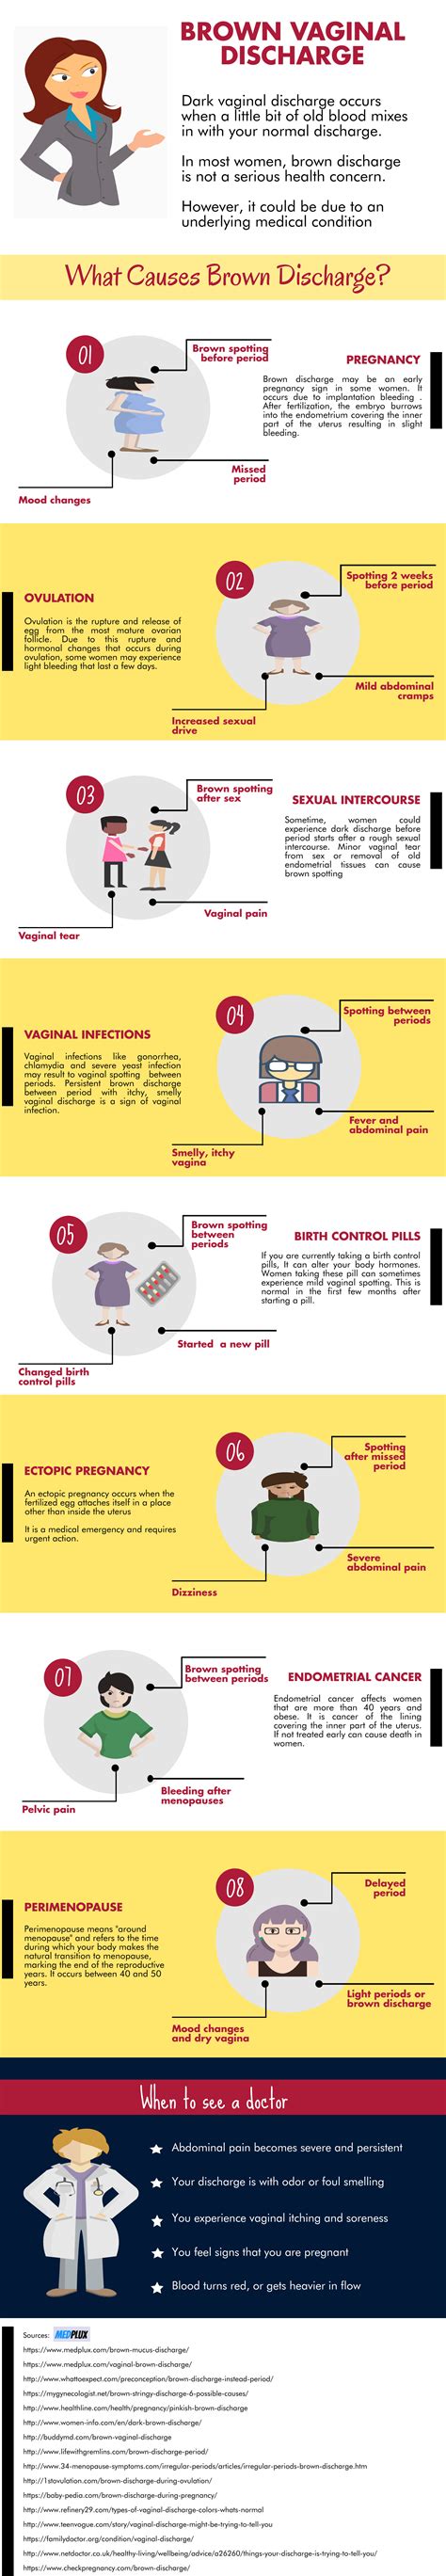 Vaginal Brown Discharge Causes And Concerns Infographic The Best Porn